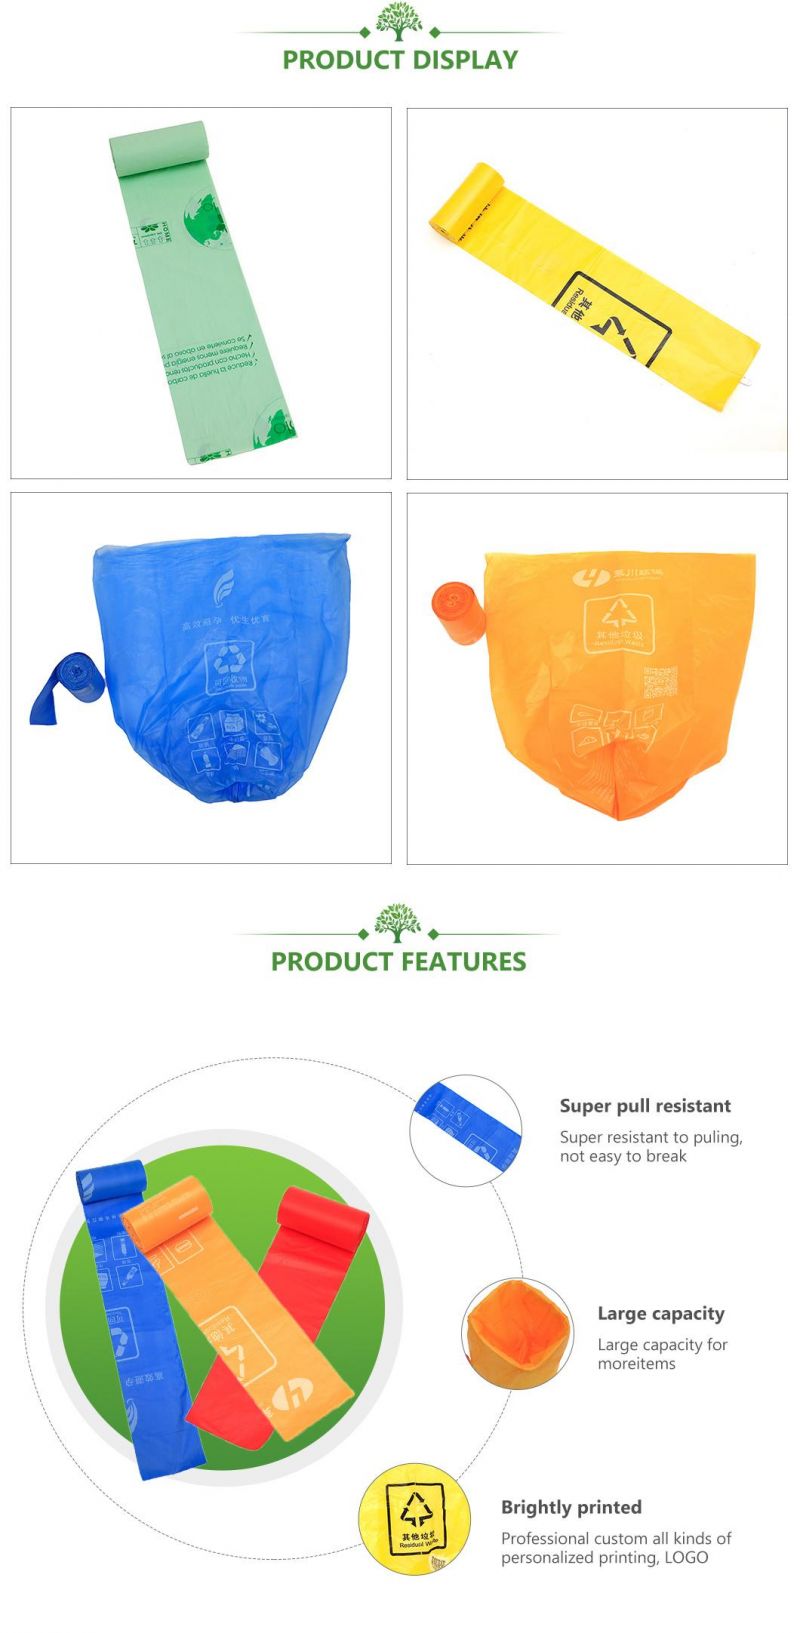 China 100% Biodegradable Bags Compostable Trash Bags Manufacturer/Supplier/Wholesale/Factory